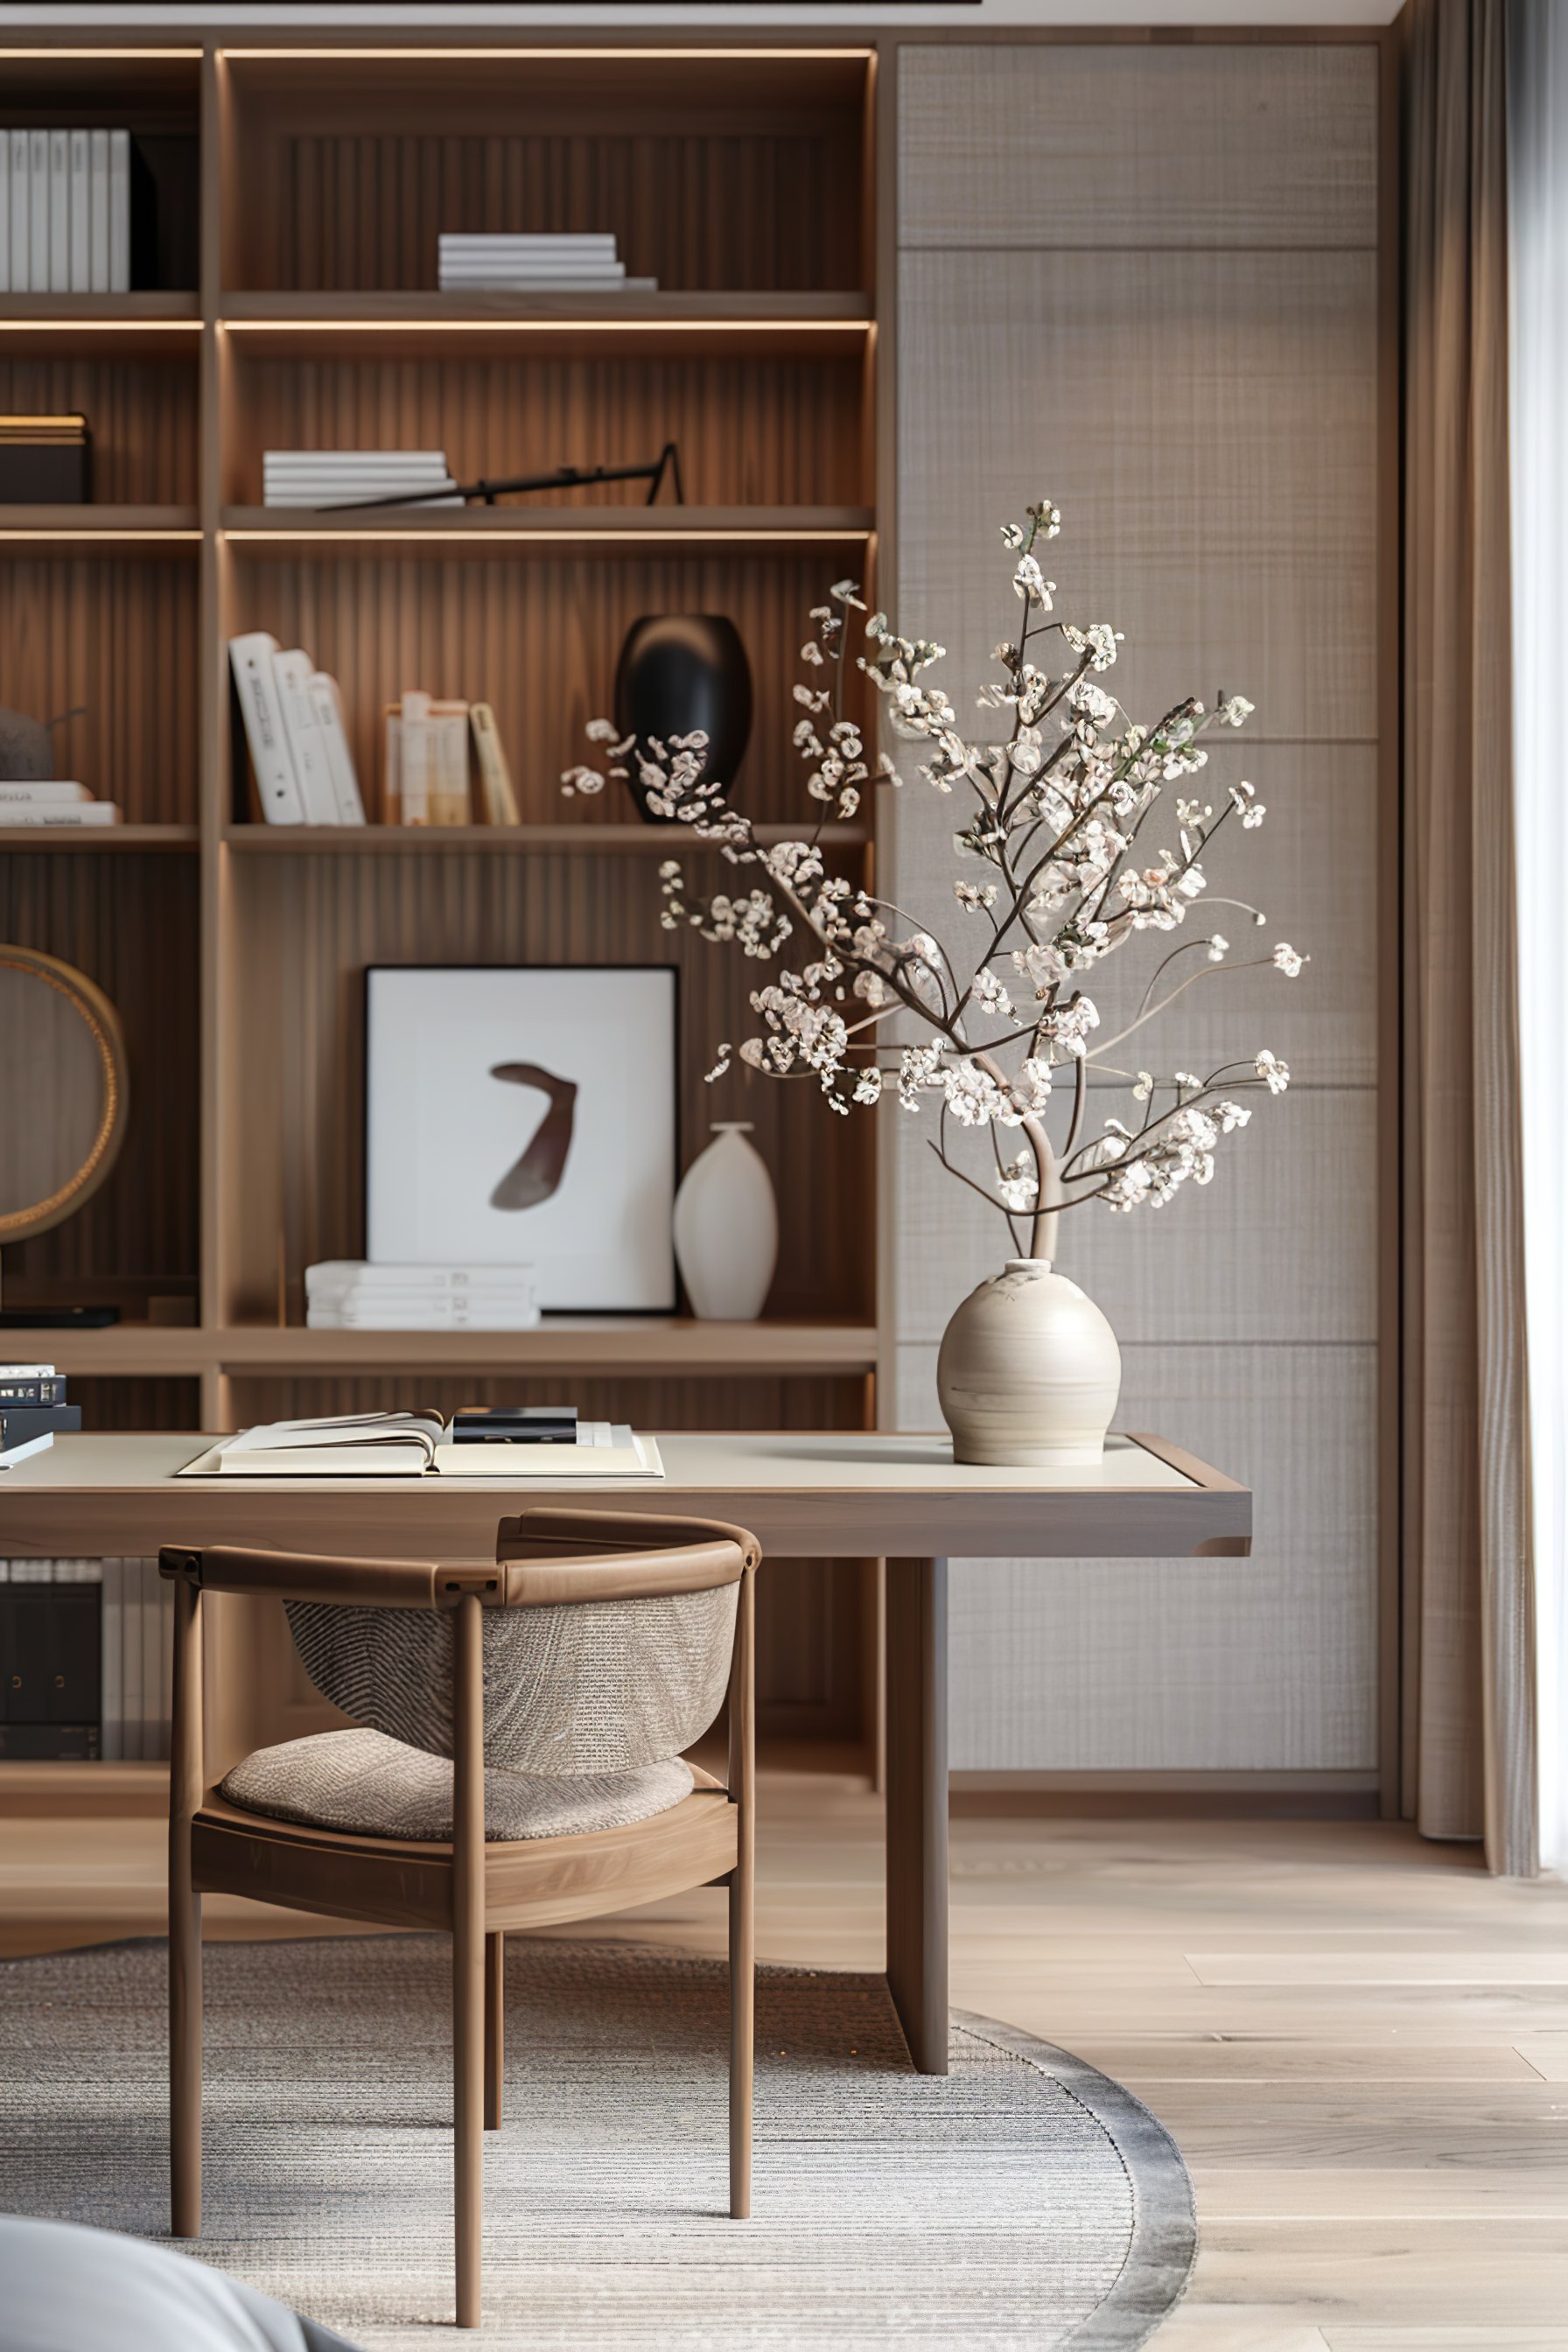 A modern home office setup with a wooden desk and chair, bookshelves, and a vase with flowering branches.